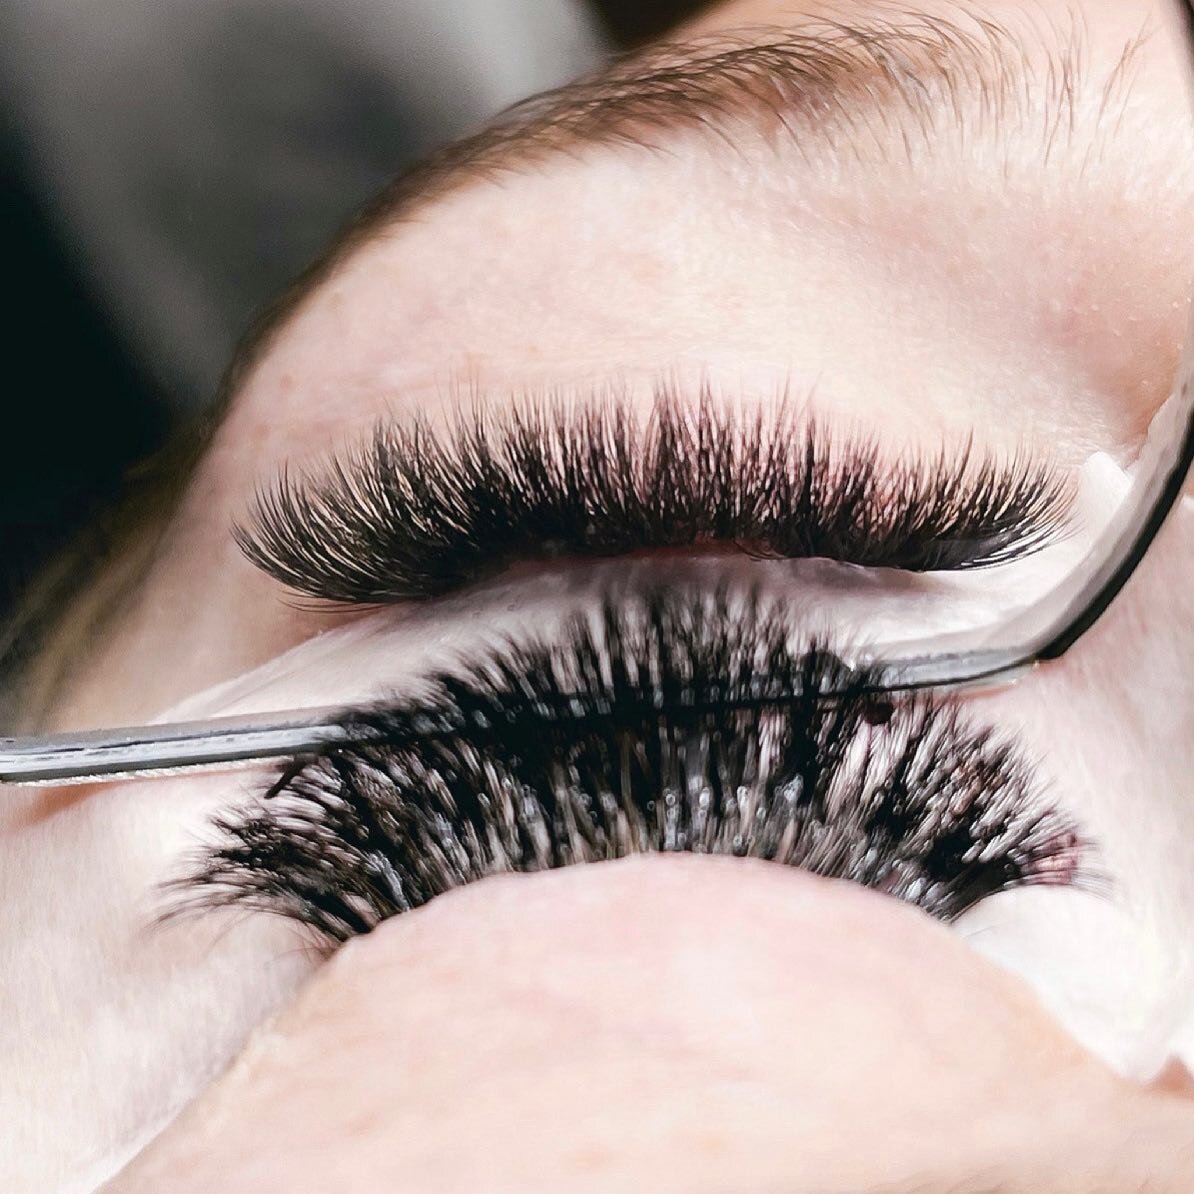 Our POV. 
__________
Volume Lashes by @nina.lumiere